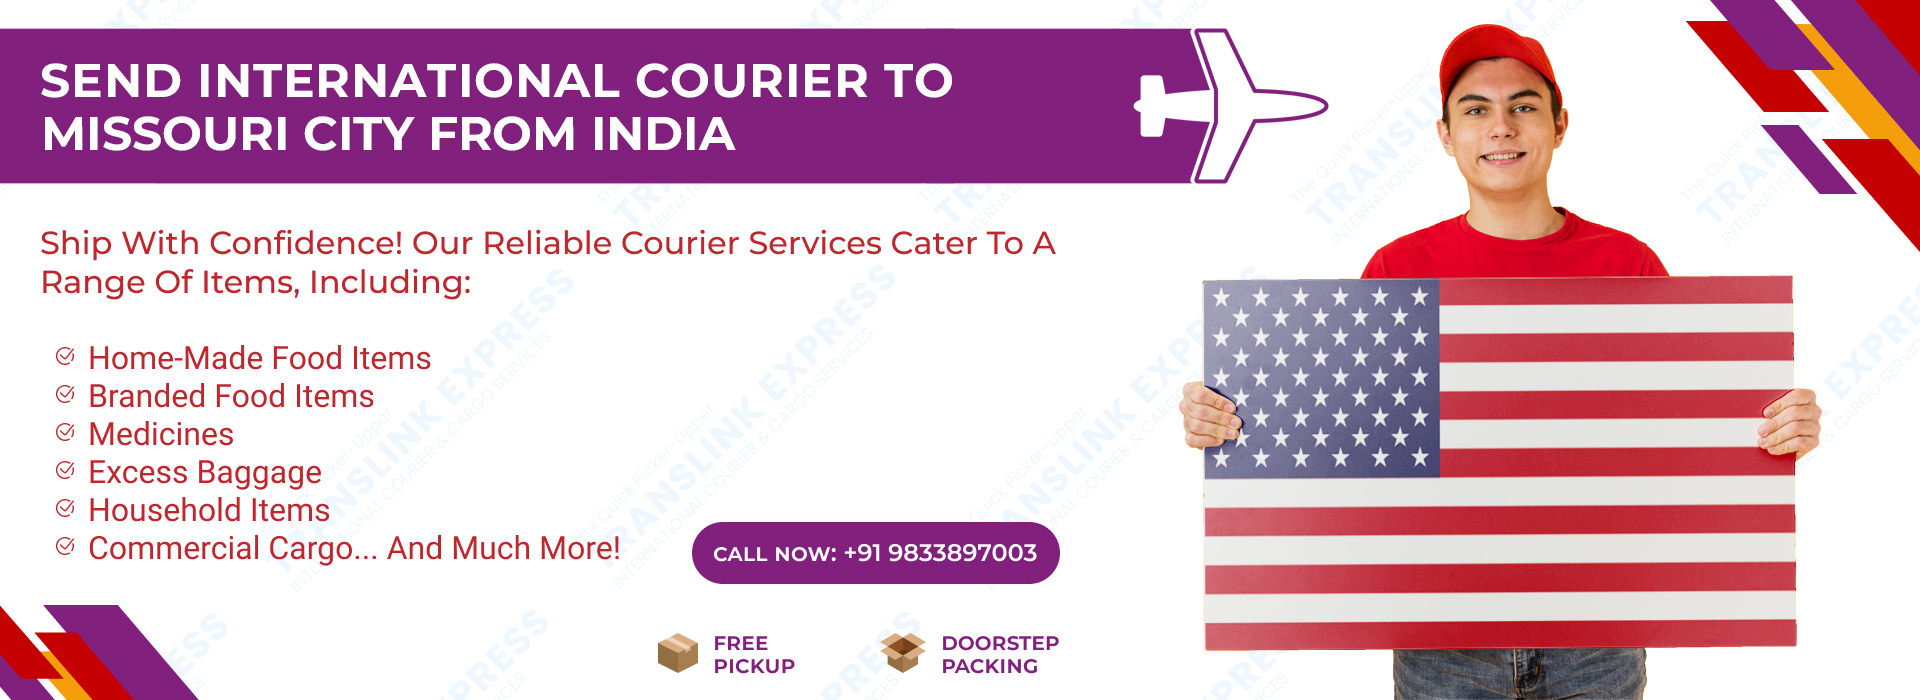 Courier to Missouri City From India